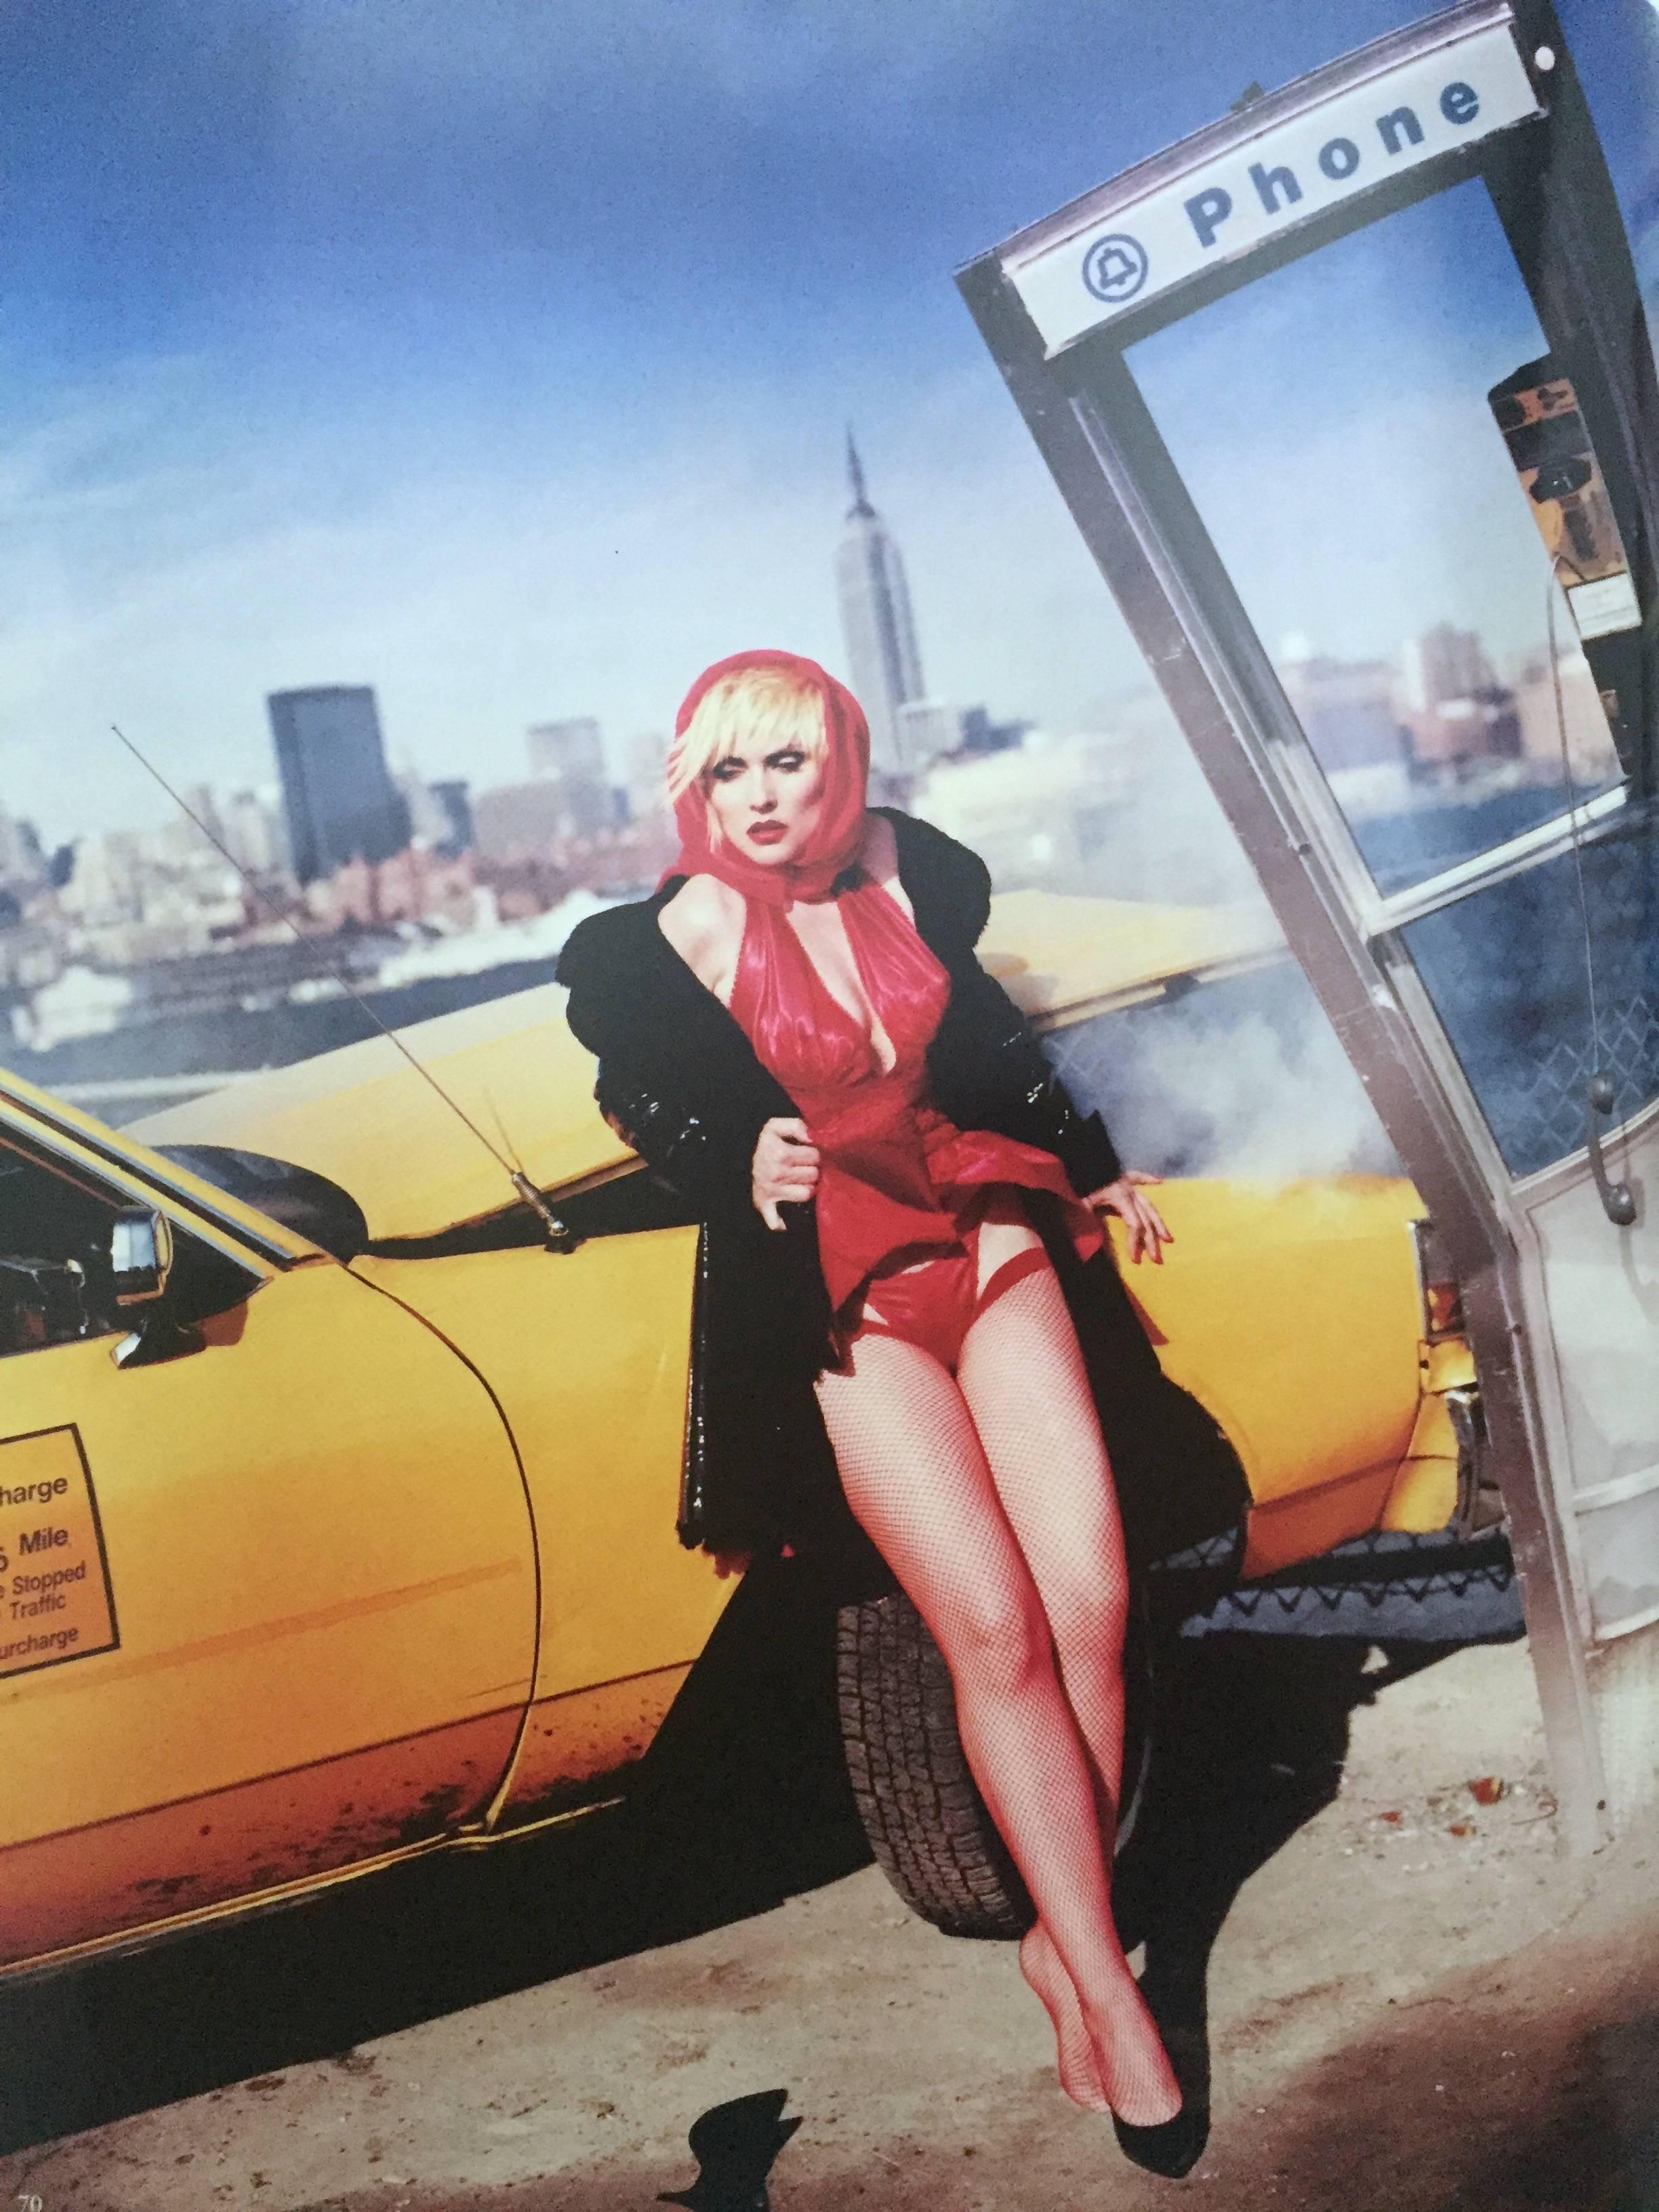 Numbered first edition, published by Simon and Schuster, 1996.

David LaChapelle has become one of the most revolutionary photographers of all time, elevating the 'celebrity' to a fictional and theatrical idea, through his extreme sets and